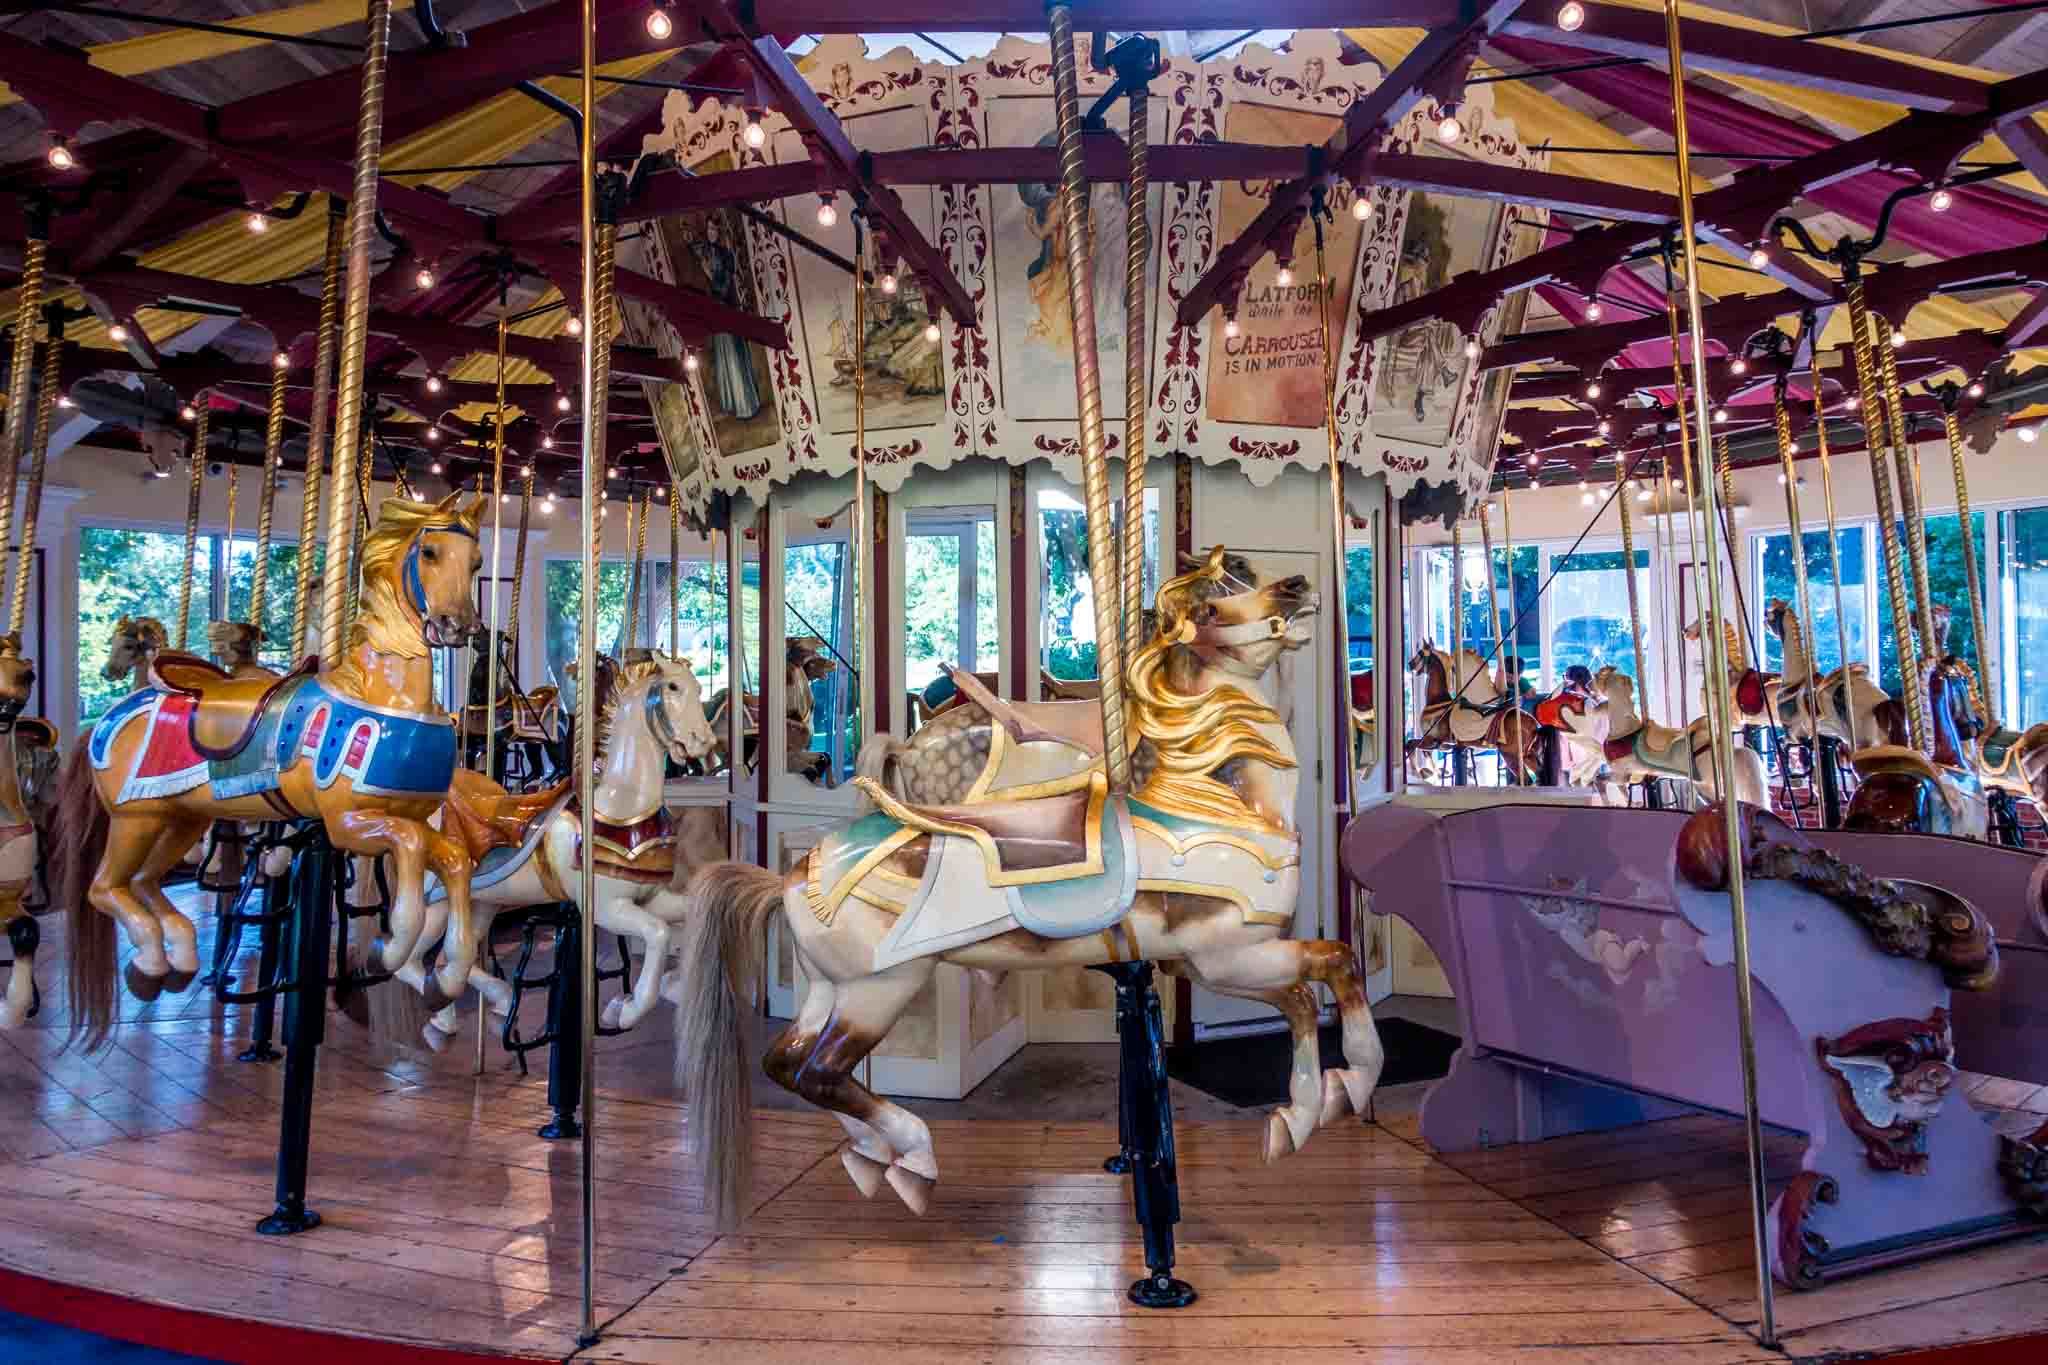 Colorful carousel ride